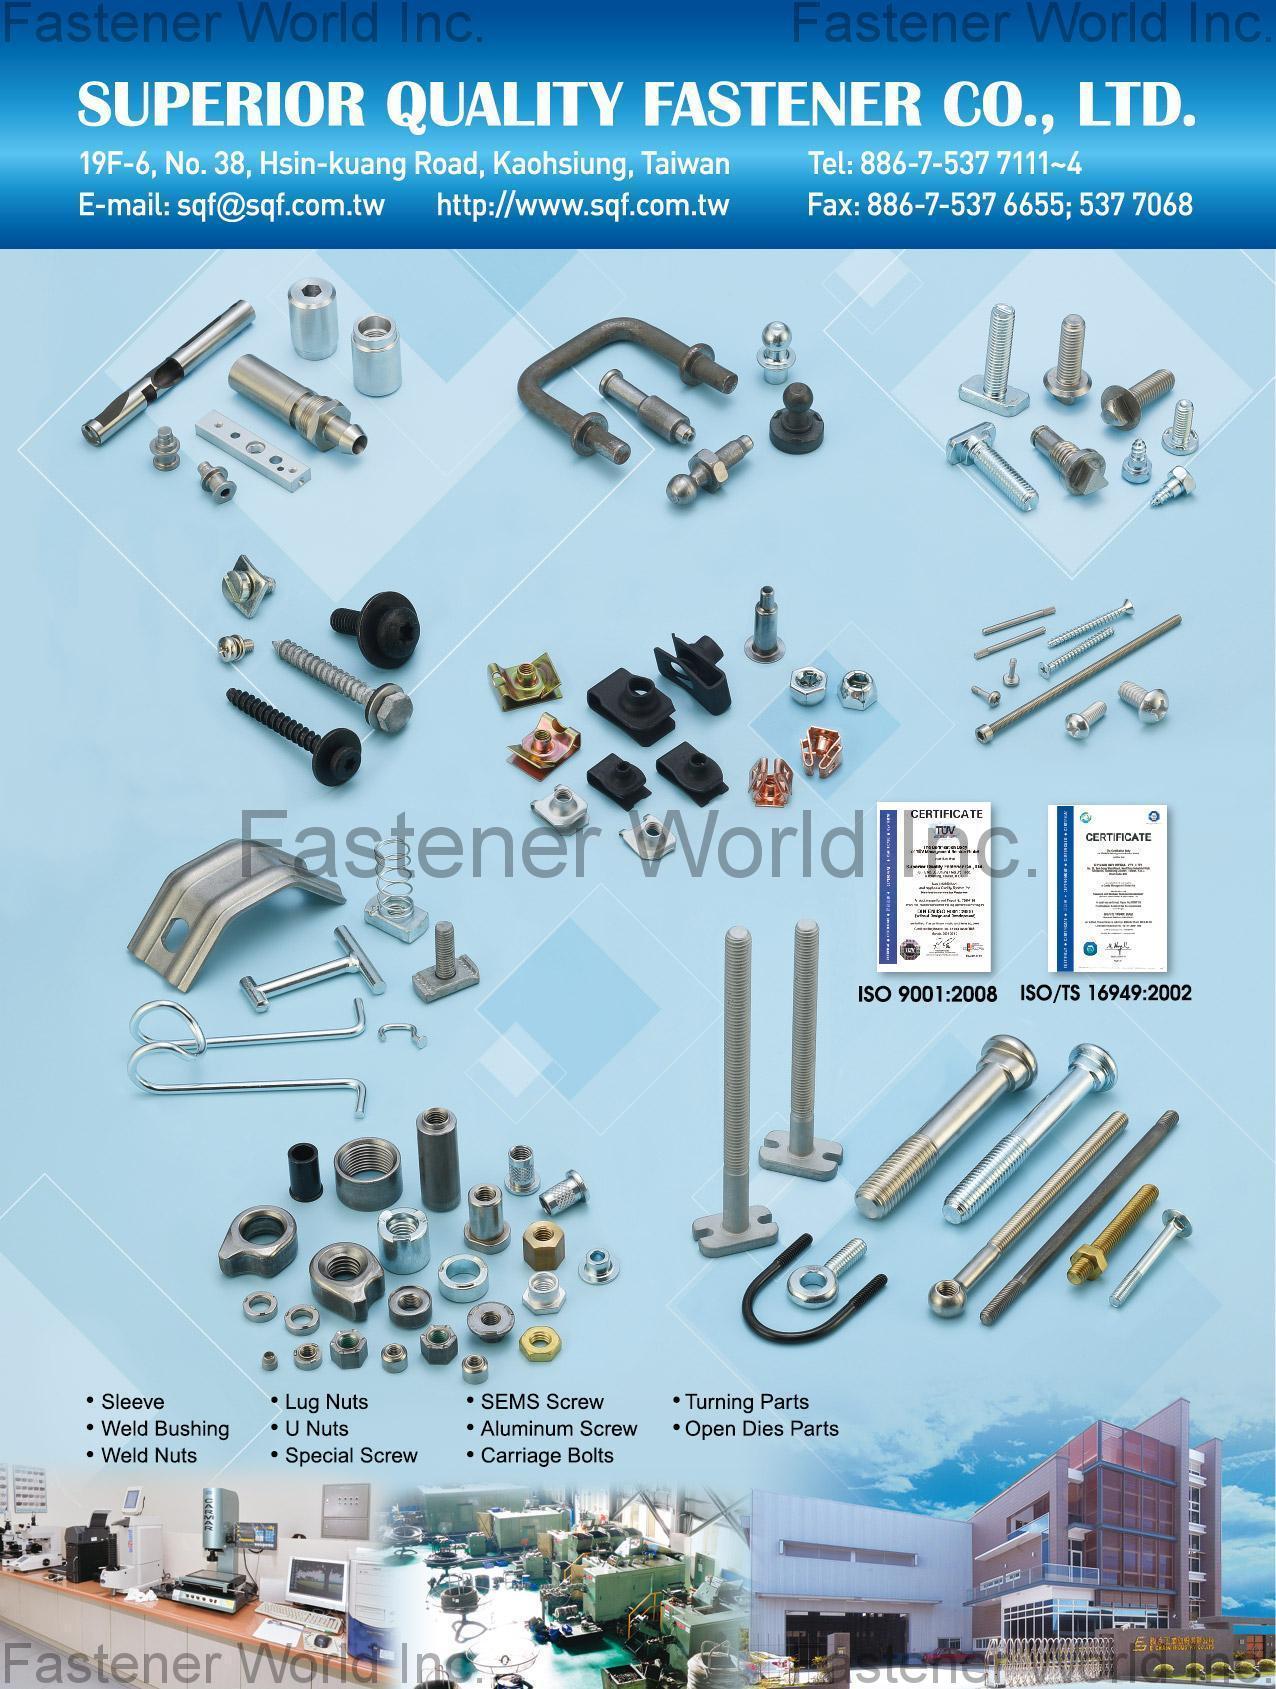 SUPERIOR QUALITY FASTENER CO., LTD.  , Sleeve, Weld Bushing, Weld Nuts, Lug Nuts, U Nuts, Special Screw, SEMS Screw, Aluminum Screw, Carriage Bolts, Turning Parts, Open Dies Parts  , Sleeve Nuts